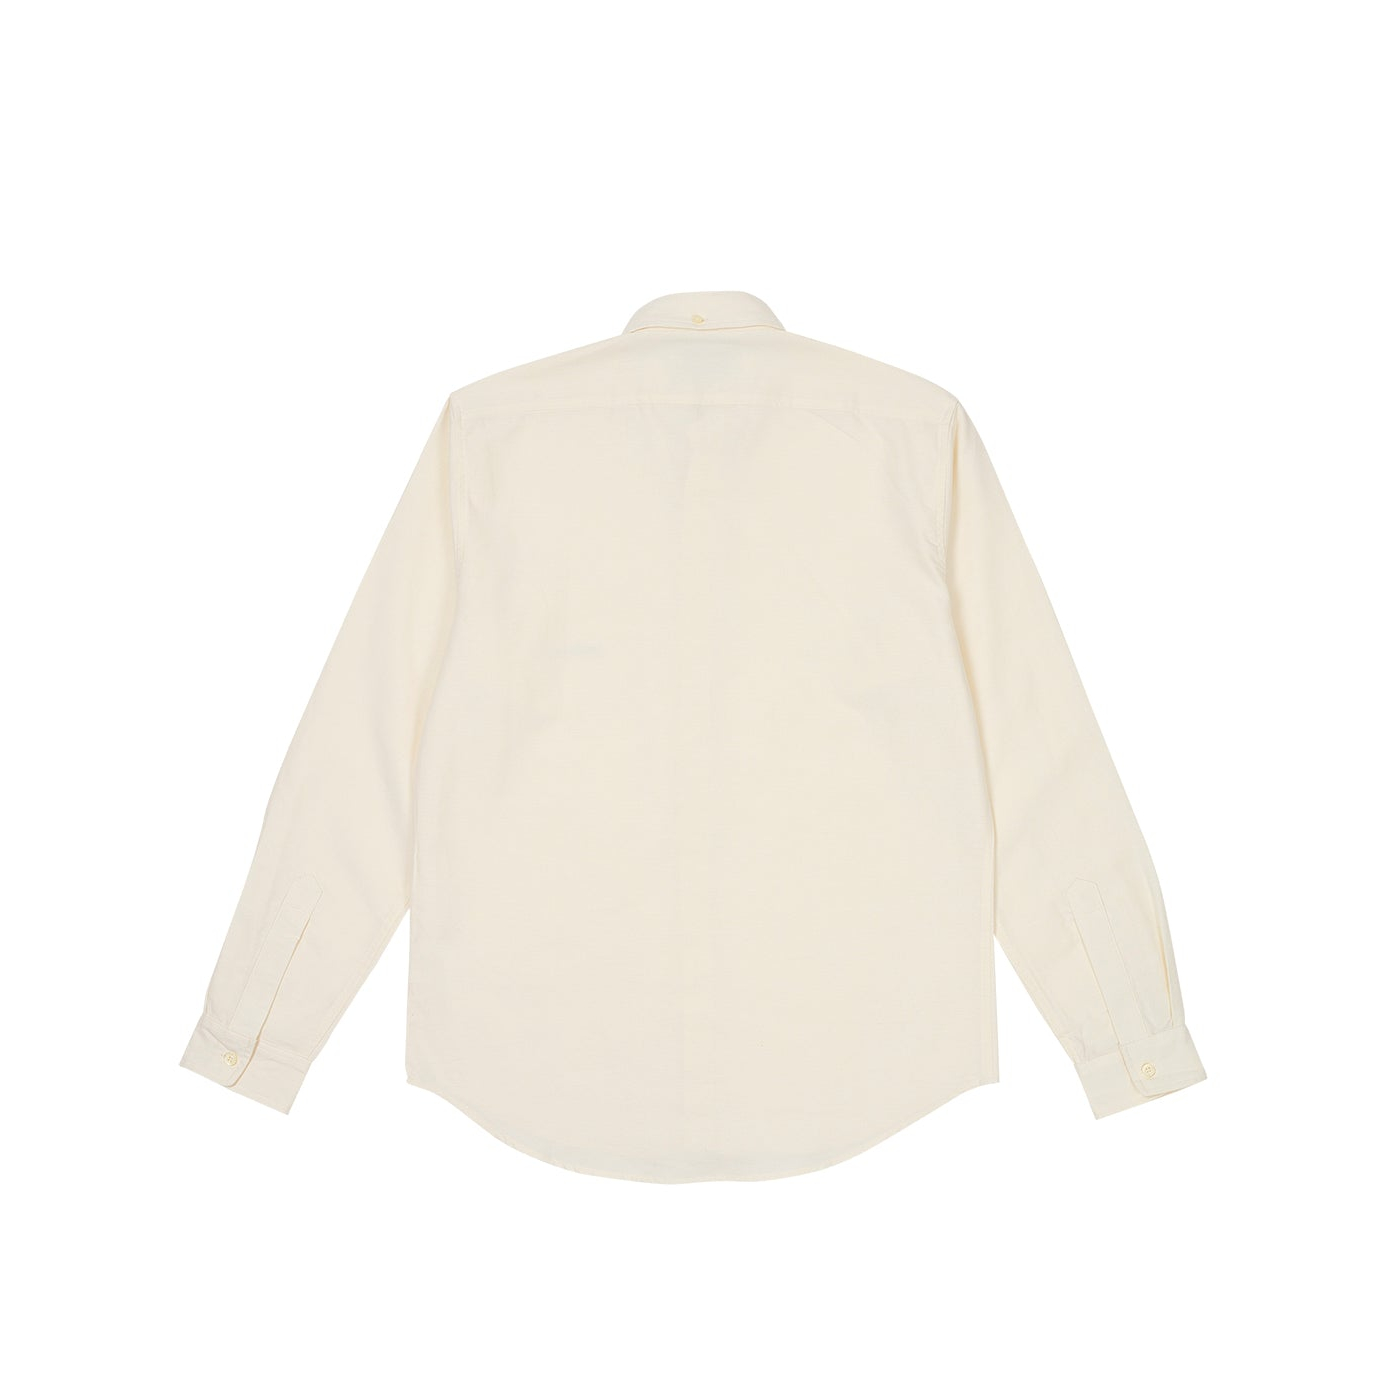 Thumbnail PALACE OXFORD SHIRT SOFT WHITE one color